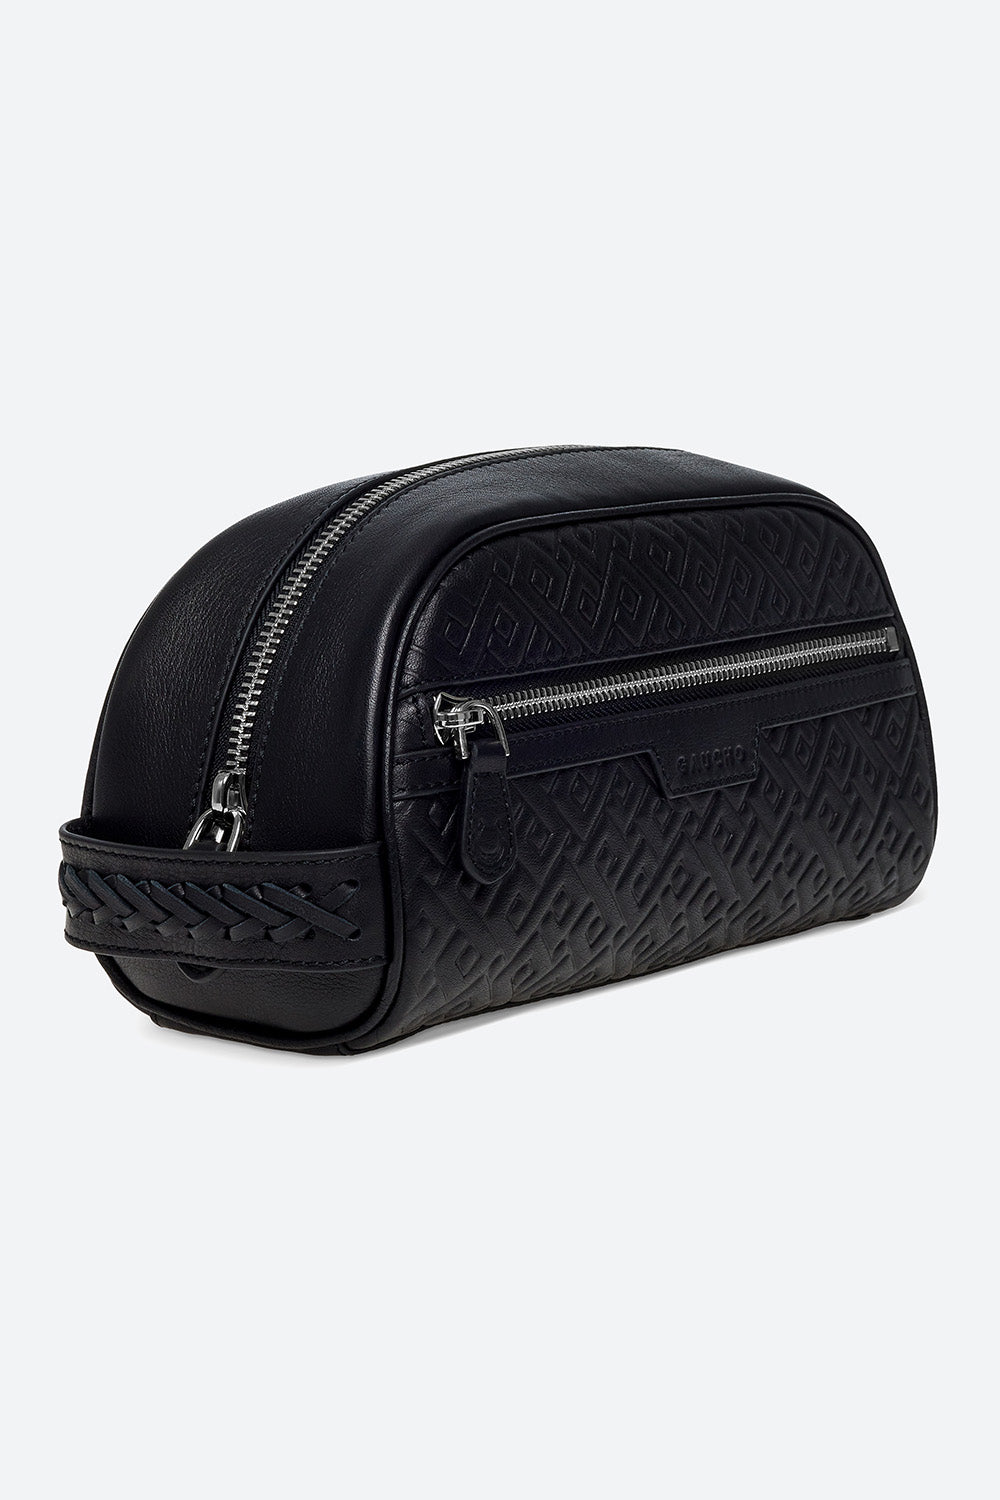 Embossed Leather Travel Case in Black